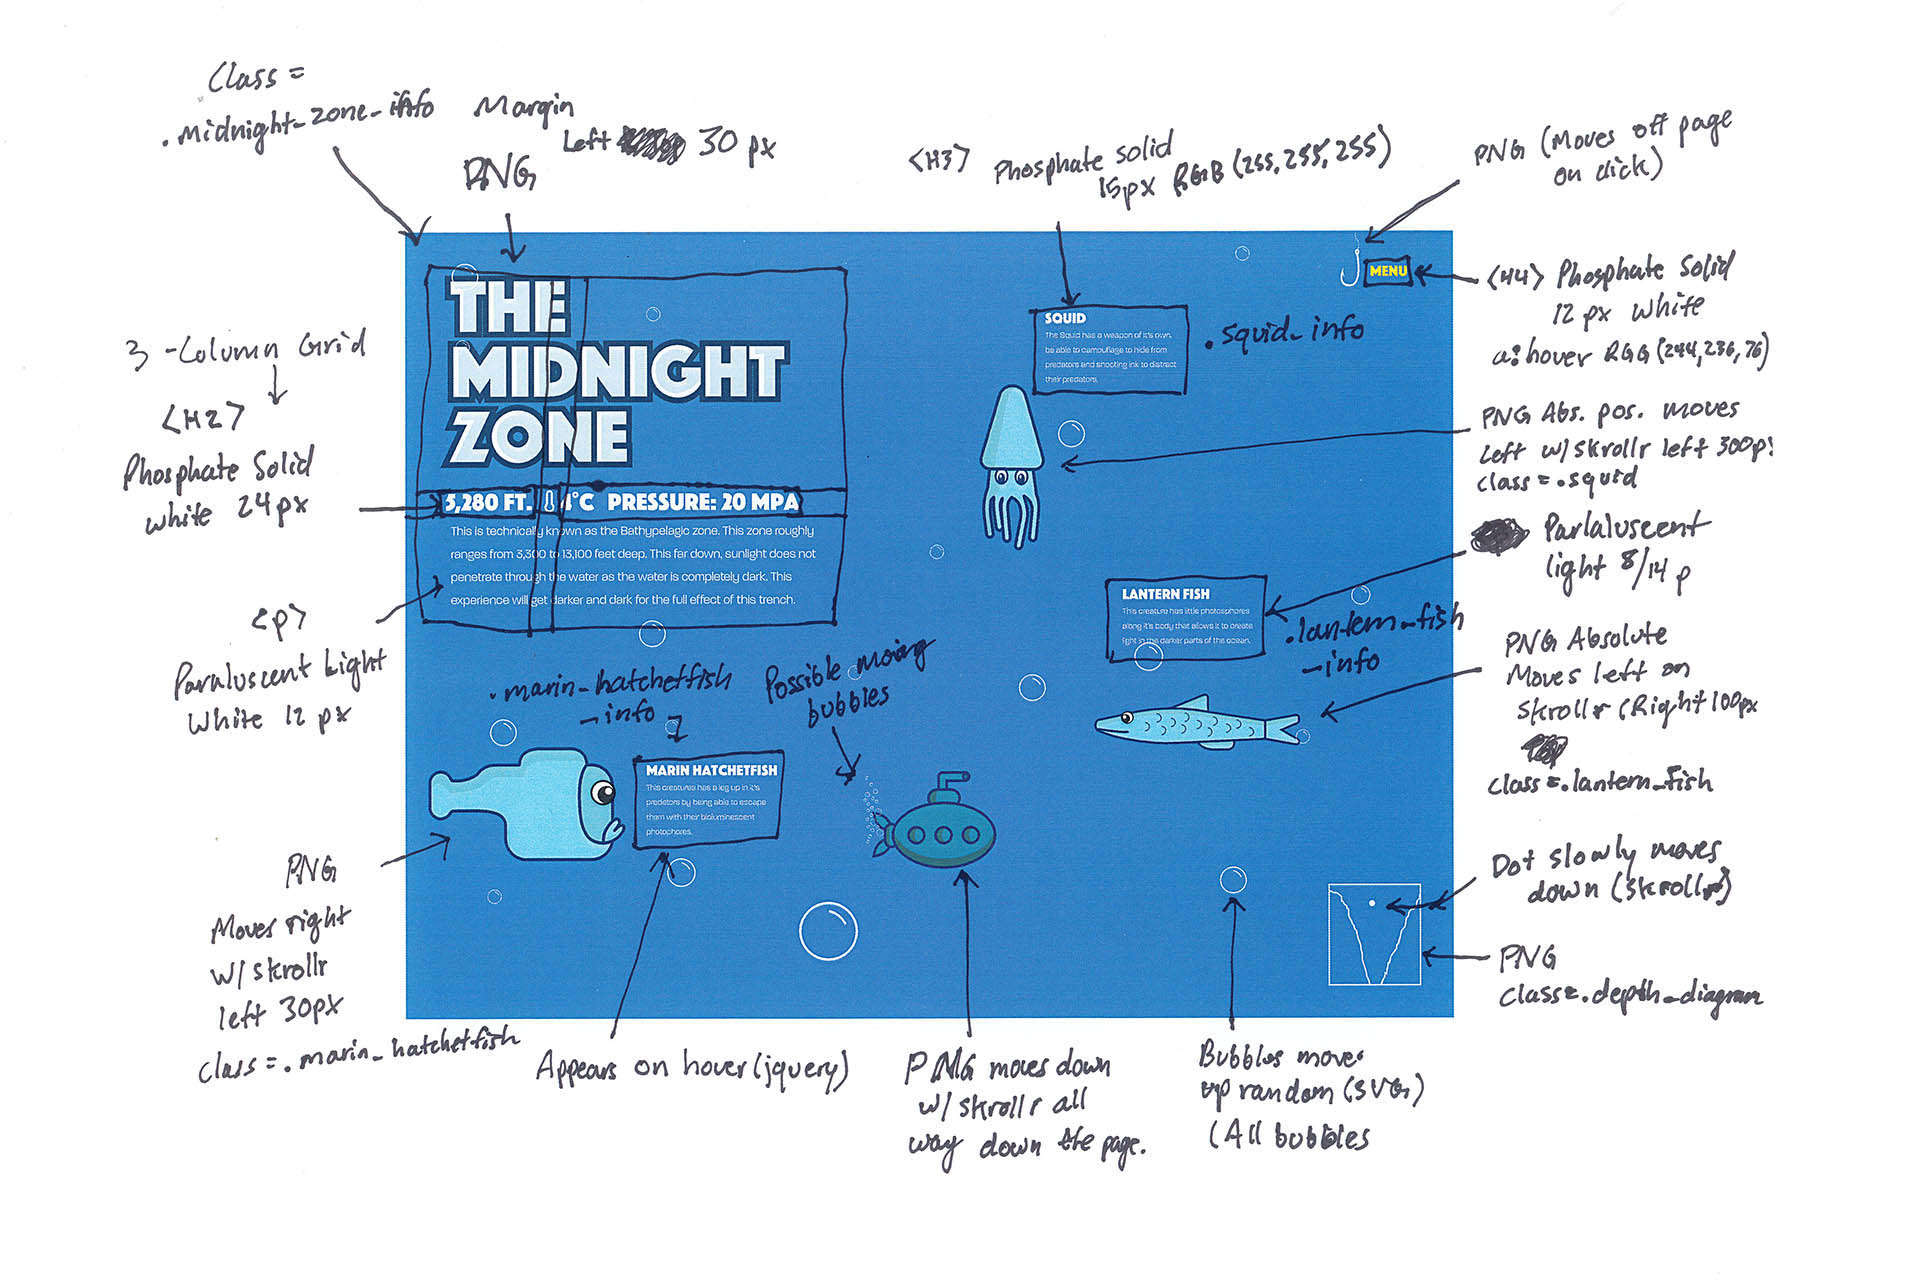 Planning the Midnight Zone page